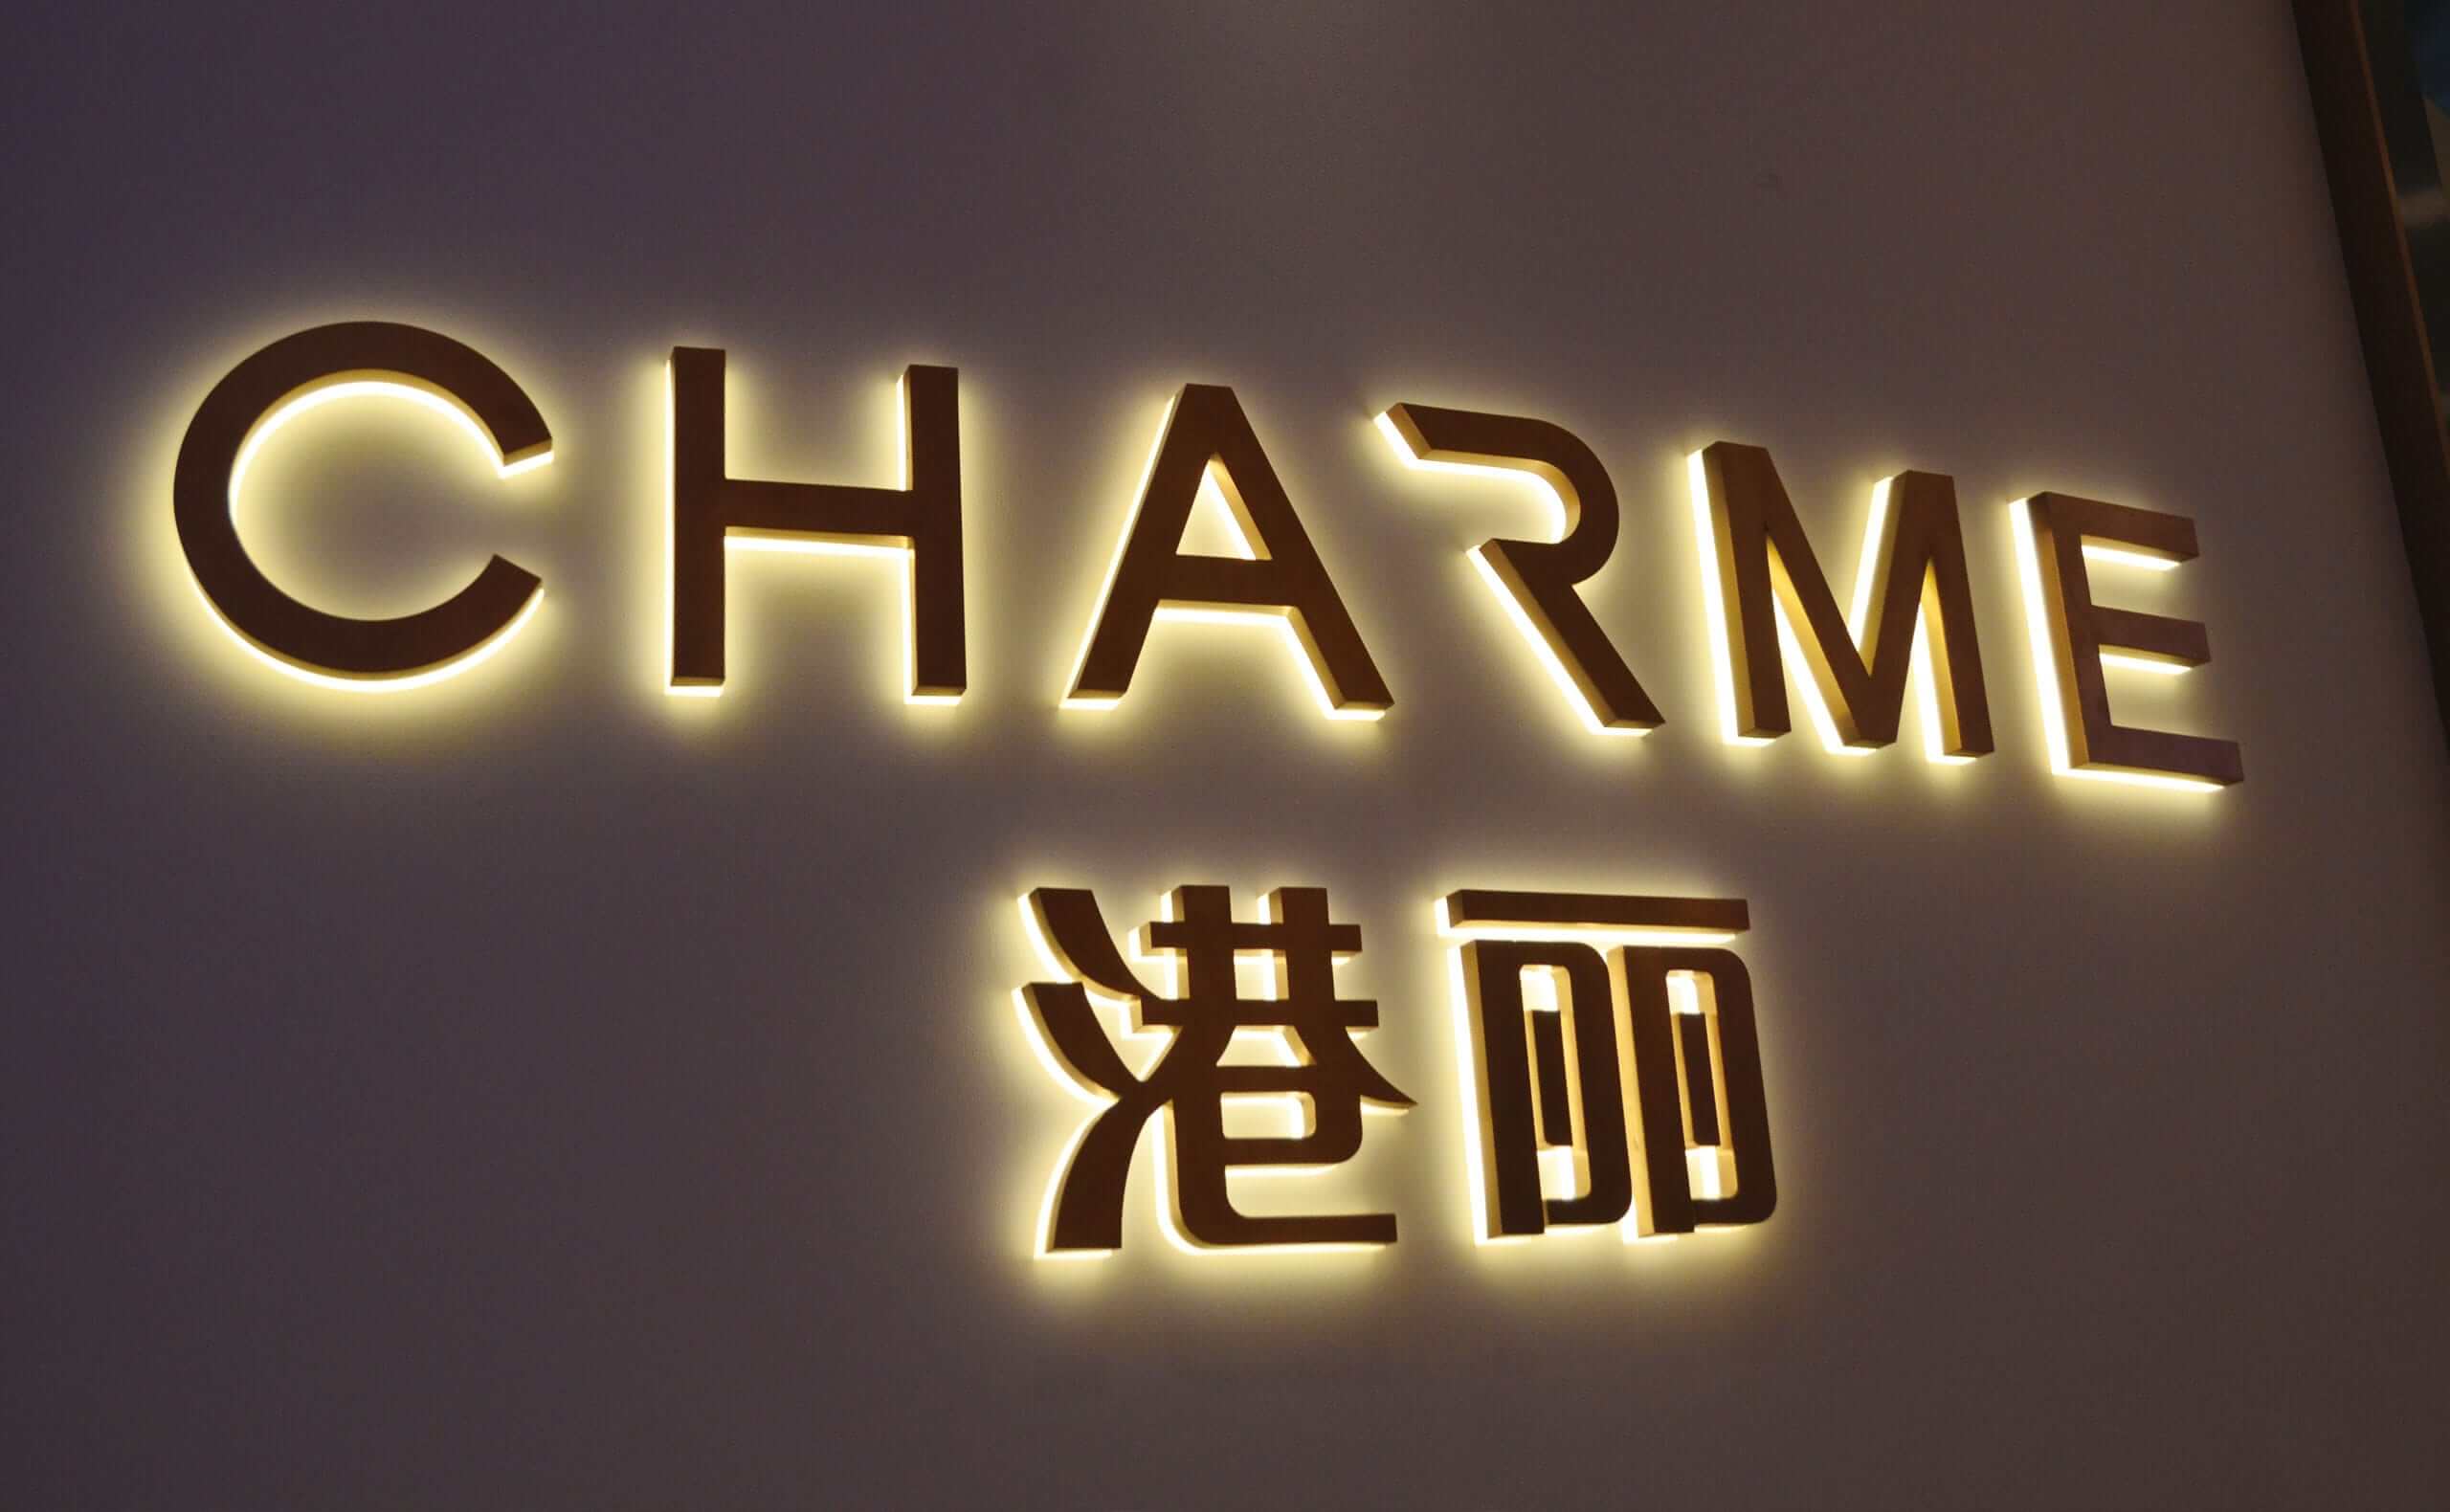 Luxury Metal Backlit Channel Letters For Charme Restaurant